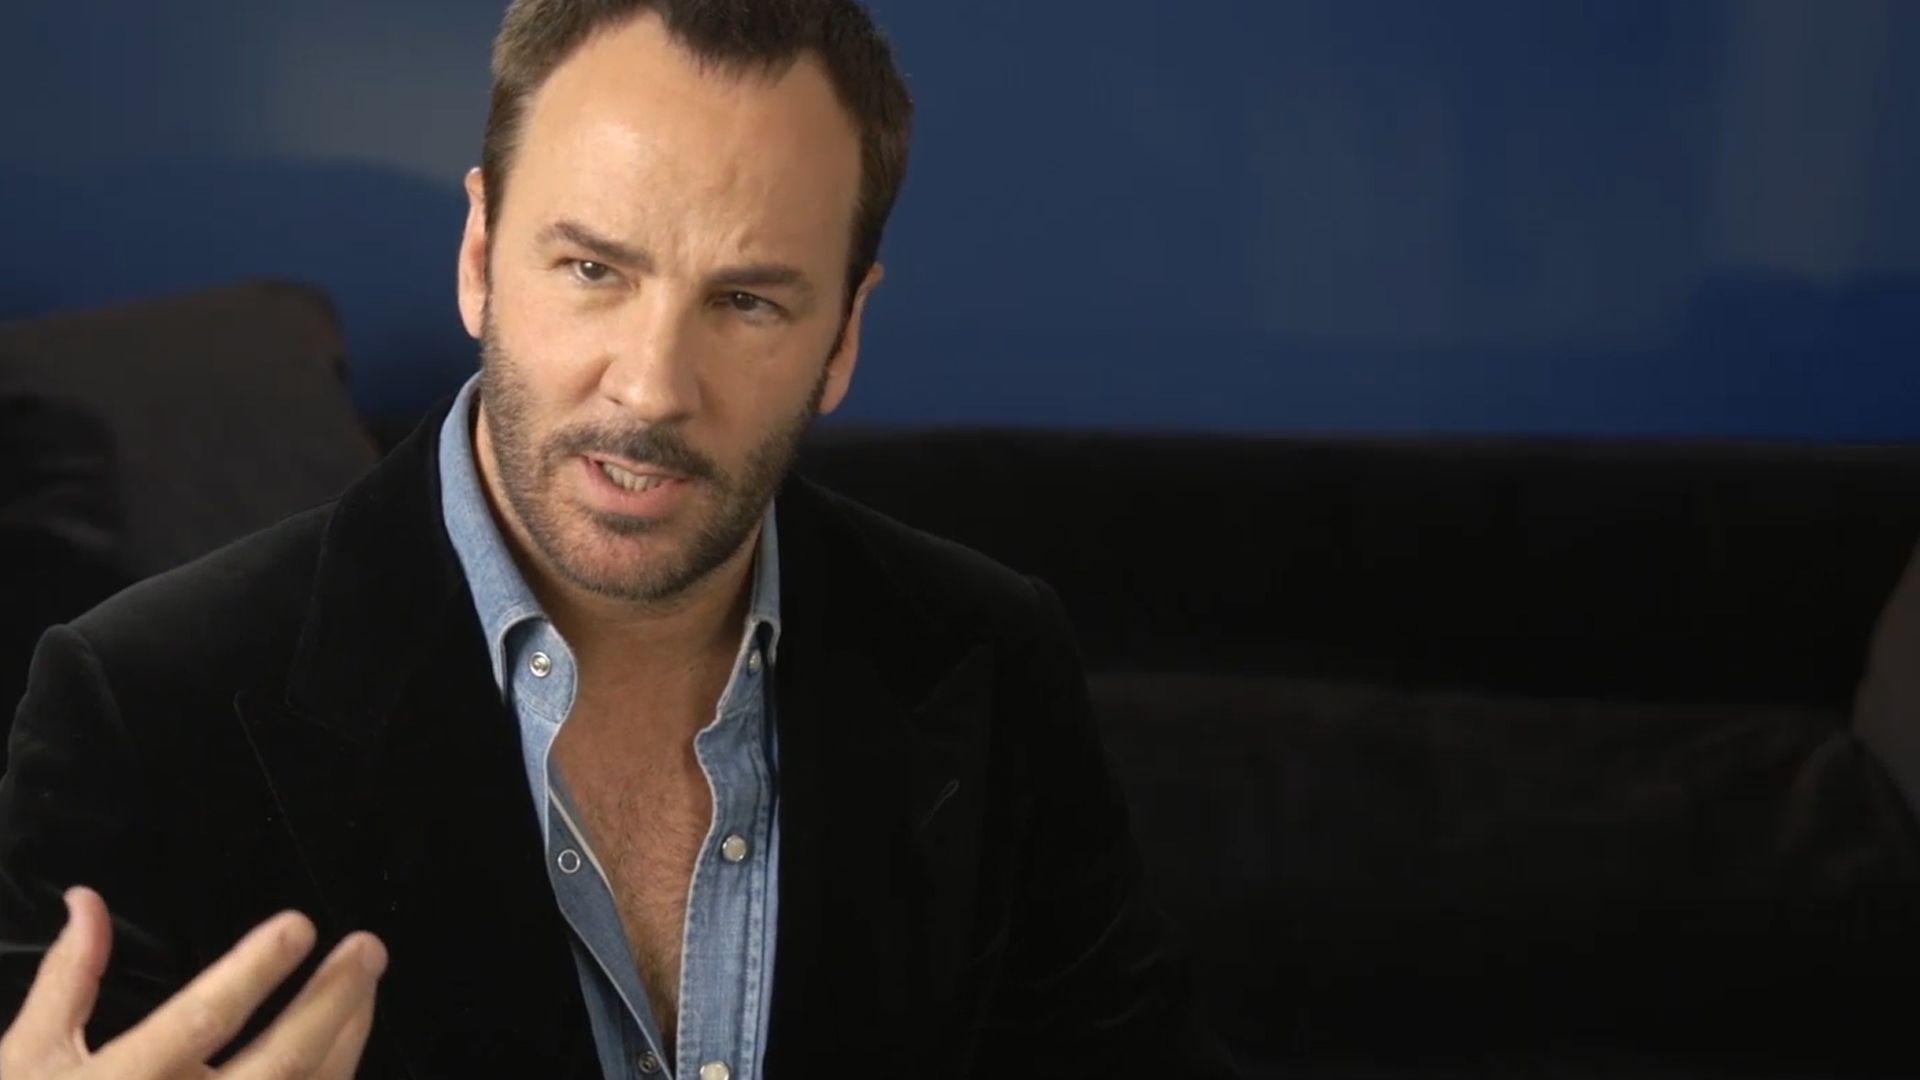 GQ Magazine on Twitter: "Tom Ford once tried to make a fragrance that smelled "vodka and cigarette breath" https://t.co/3TS7cEE5nJ" / Twitter